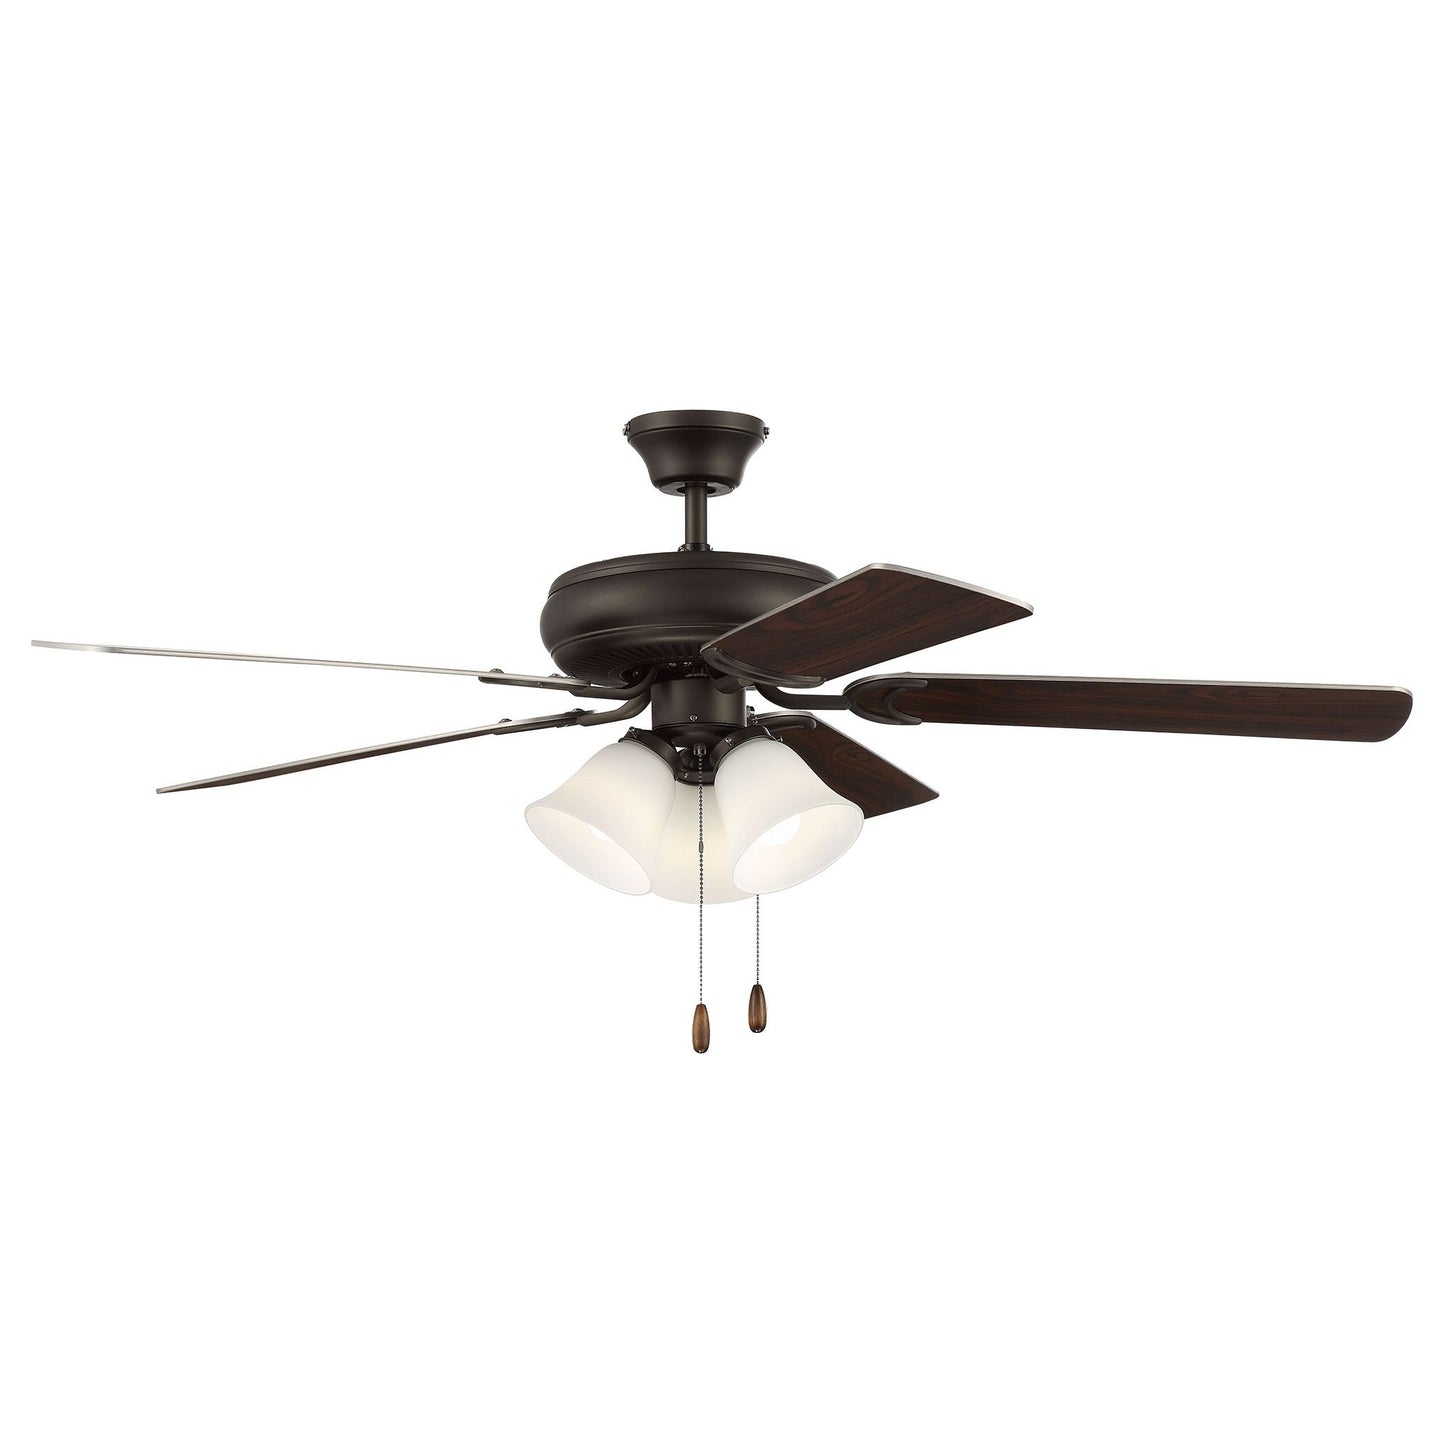 DCF52ESP5C3W - Decorator's Choice 52" 5 Blade Ceiling Fan with Light Kit - Pull Chain - Espresso